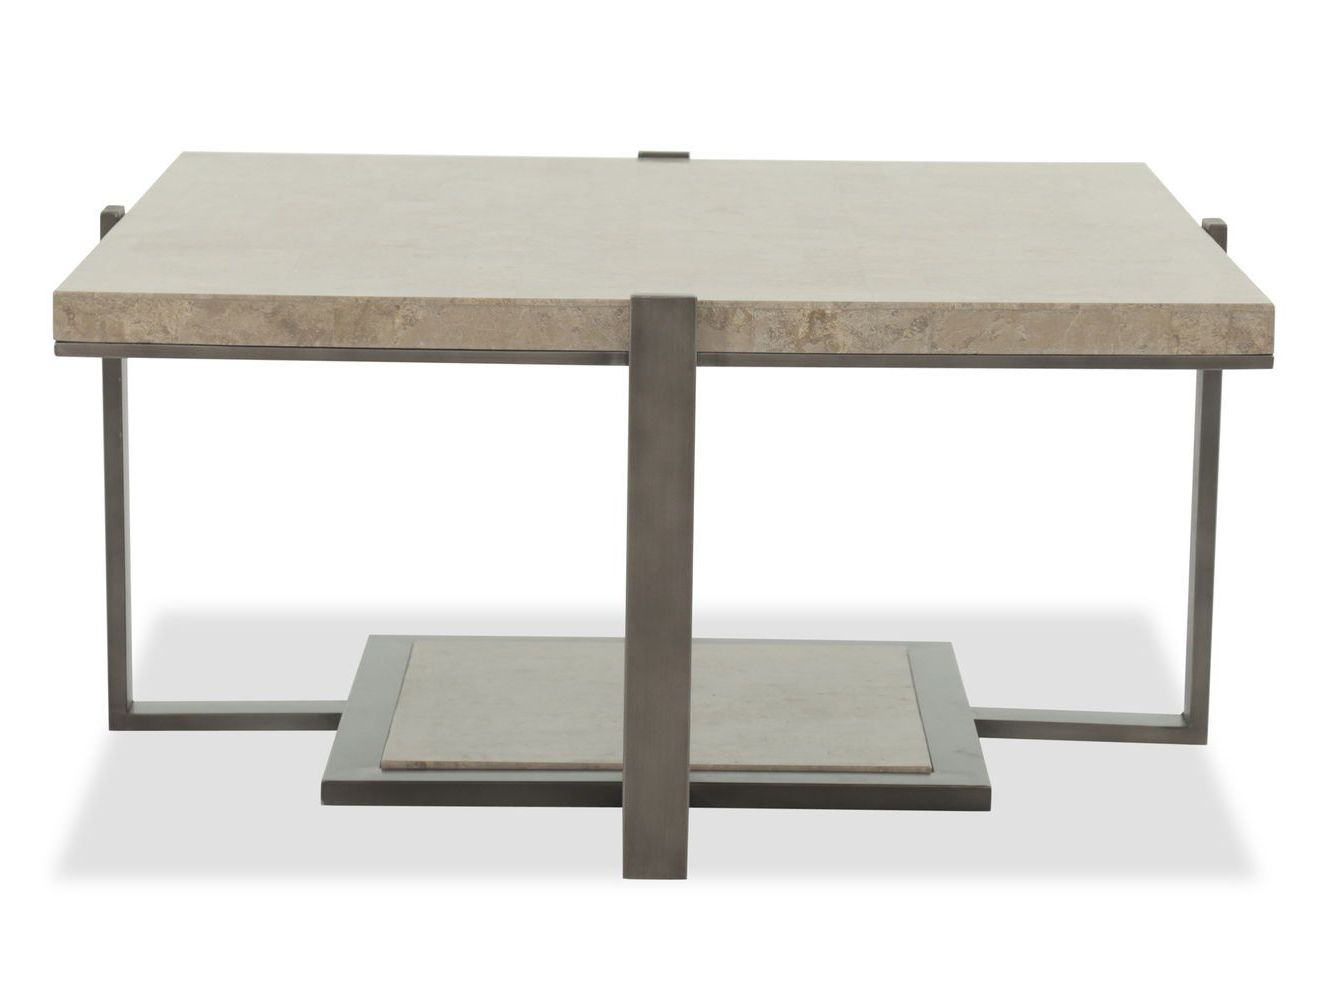 Square Modern Cocktail Table In Gray | Modern Cocktail Tables, Coffee Intended For Hassch Modern Square Cocktail Tables (Gallery 15 of 20)